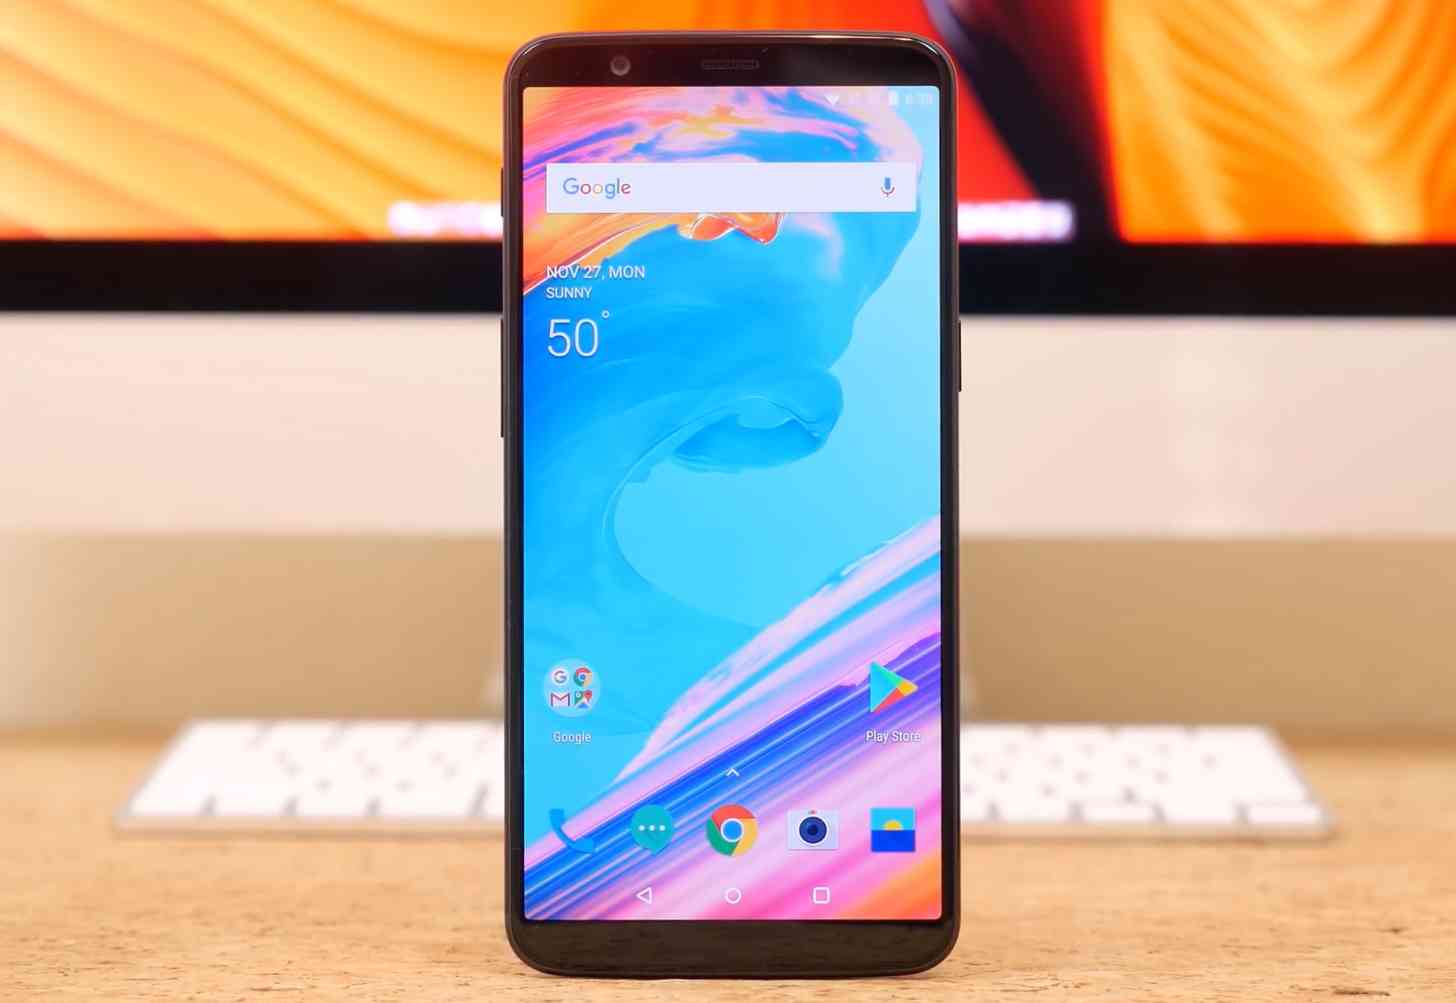 OnePlus 5T hands-on video